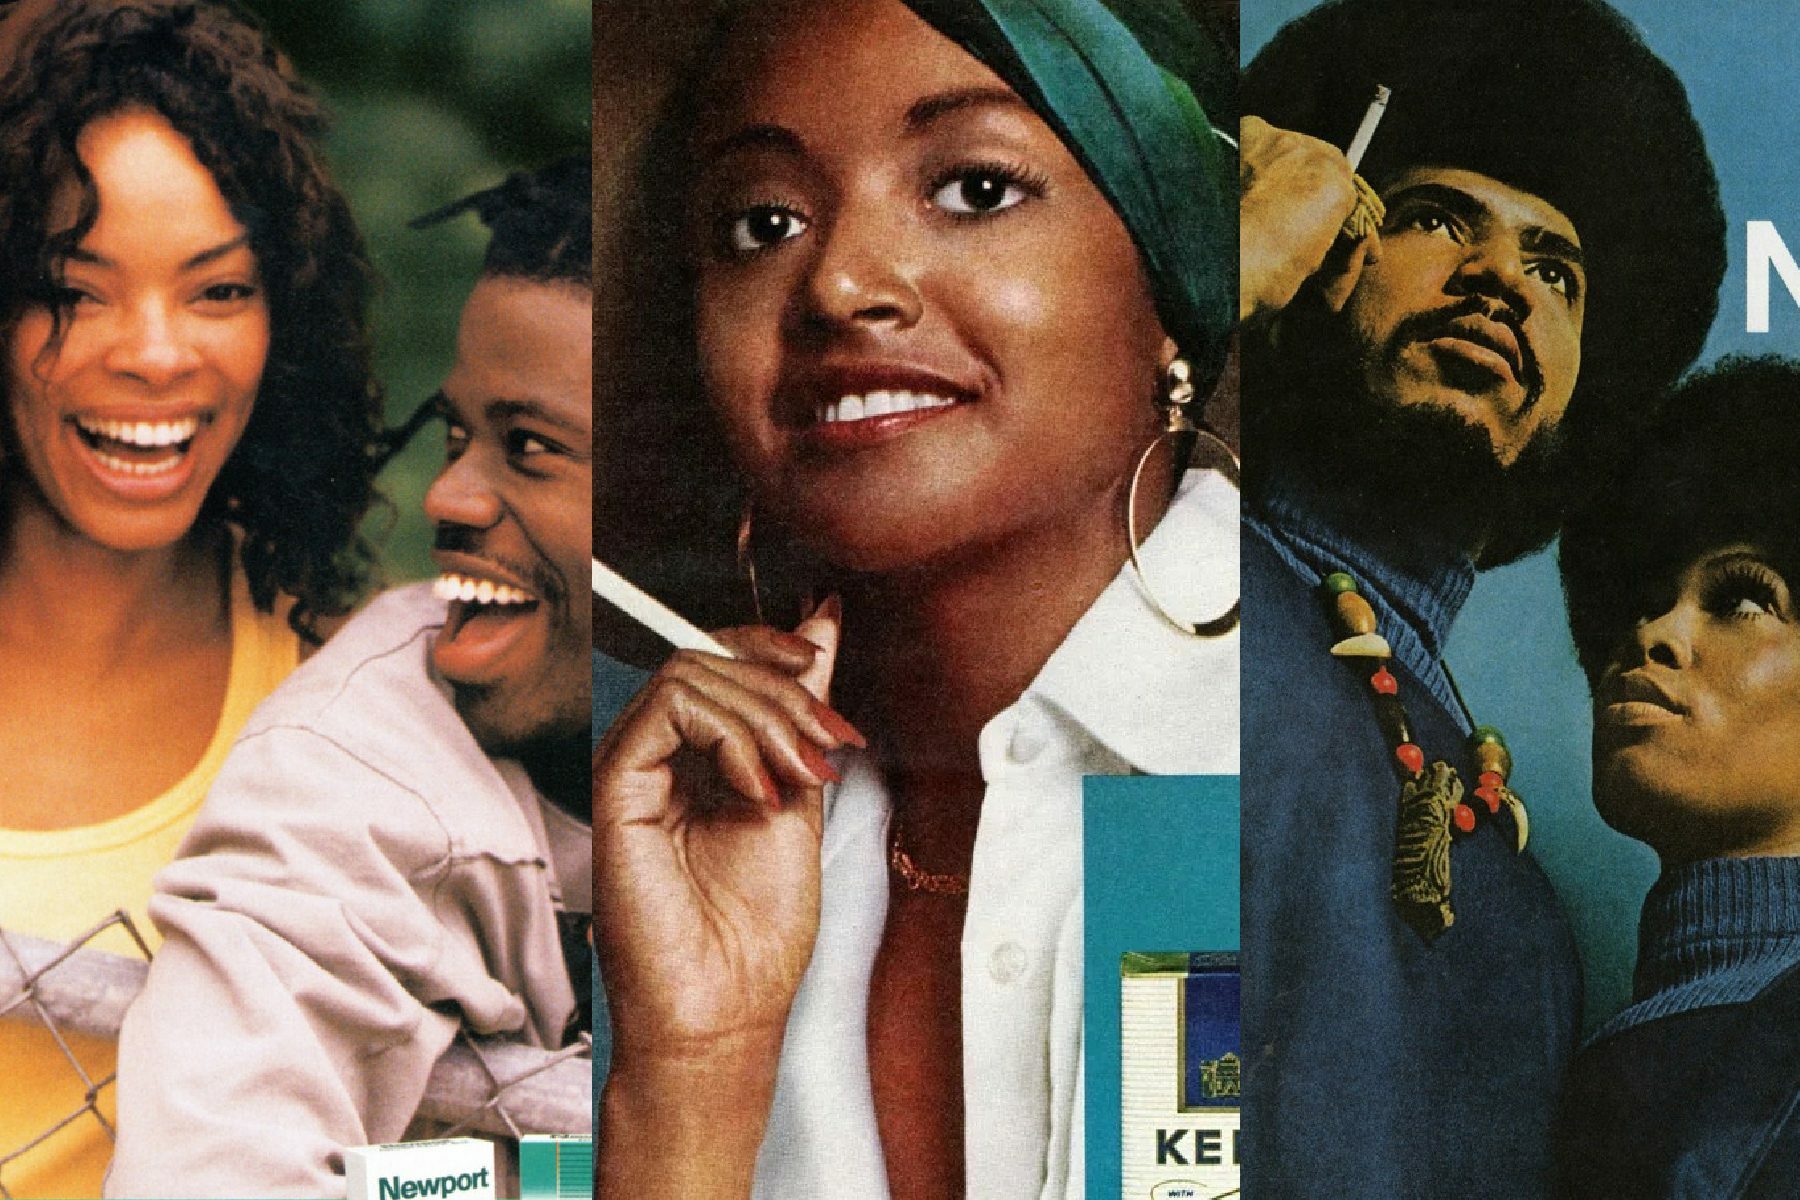 collage of three ads for menthol cigarettes featuring black couples and a black woman.